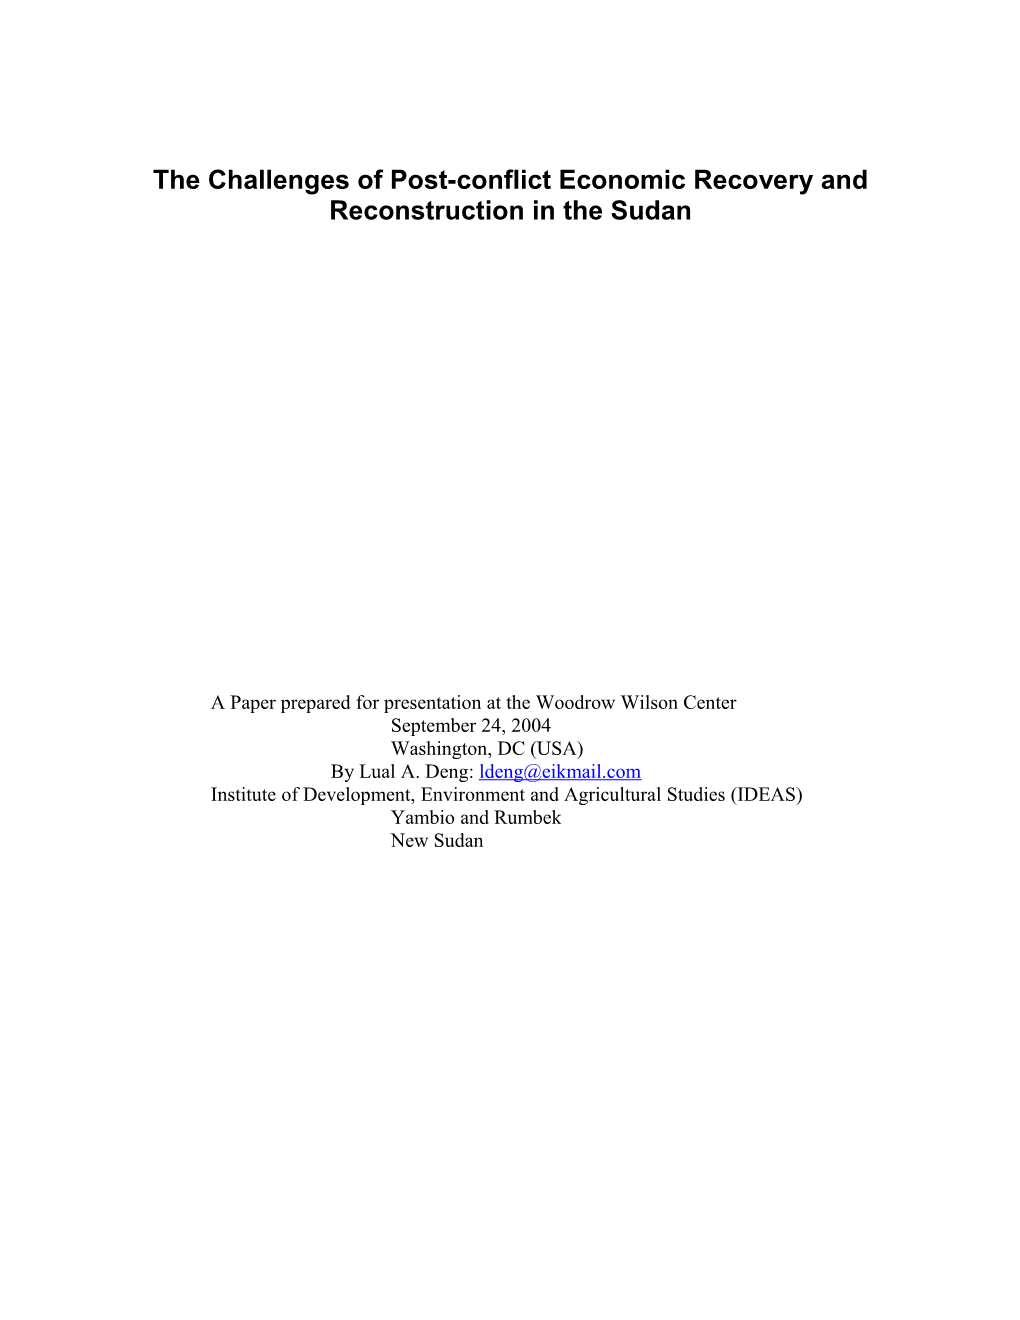 Pre-Conditions for Post-Conflict Economic Recovery and Reconstruction in the Sudan